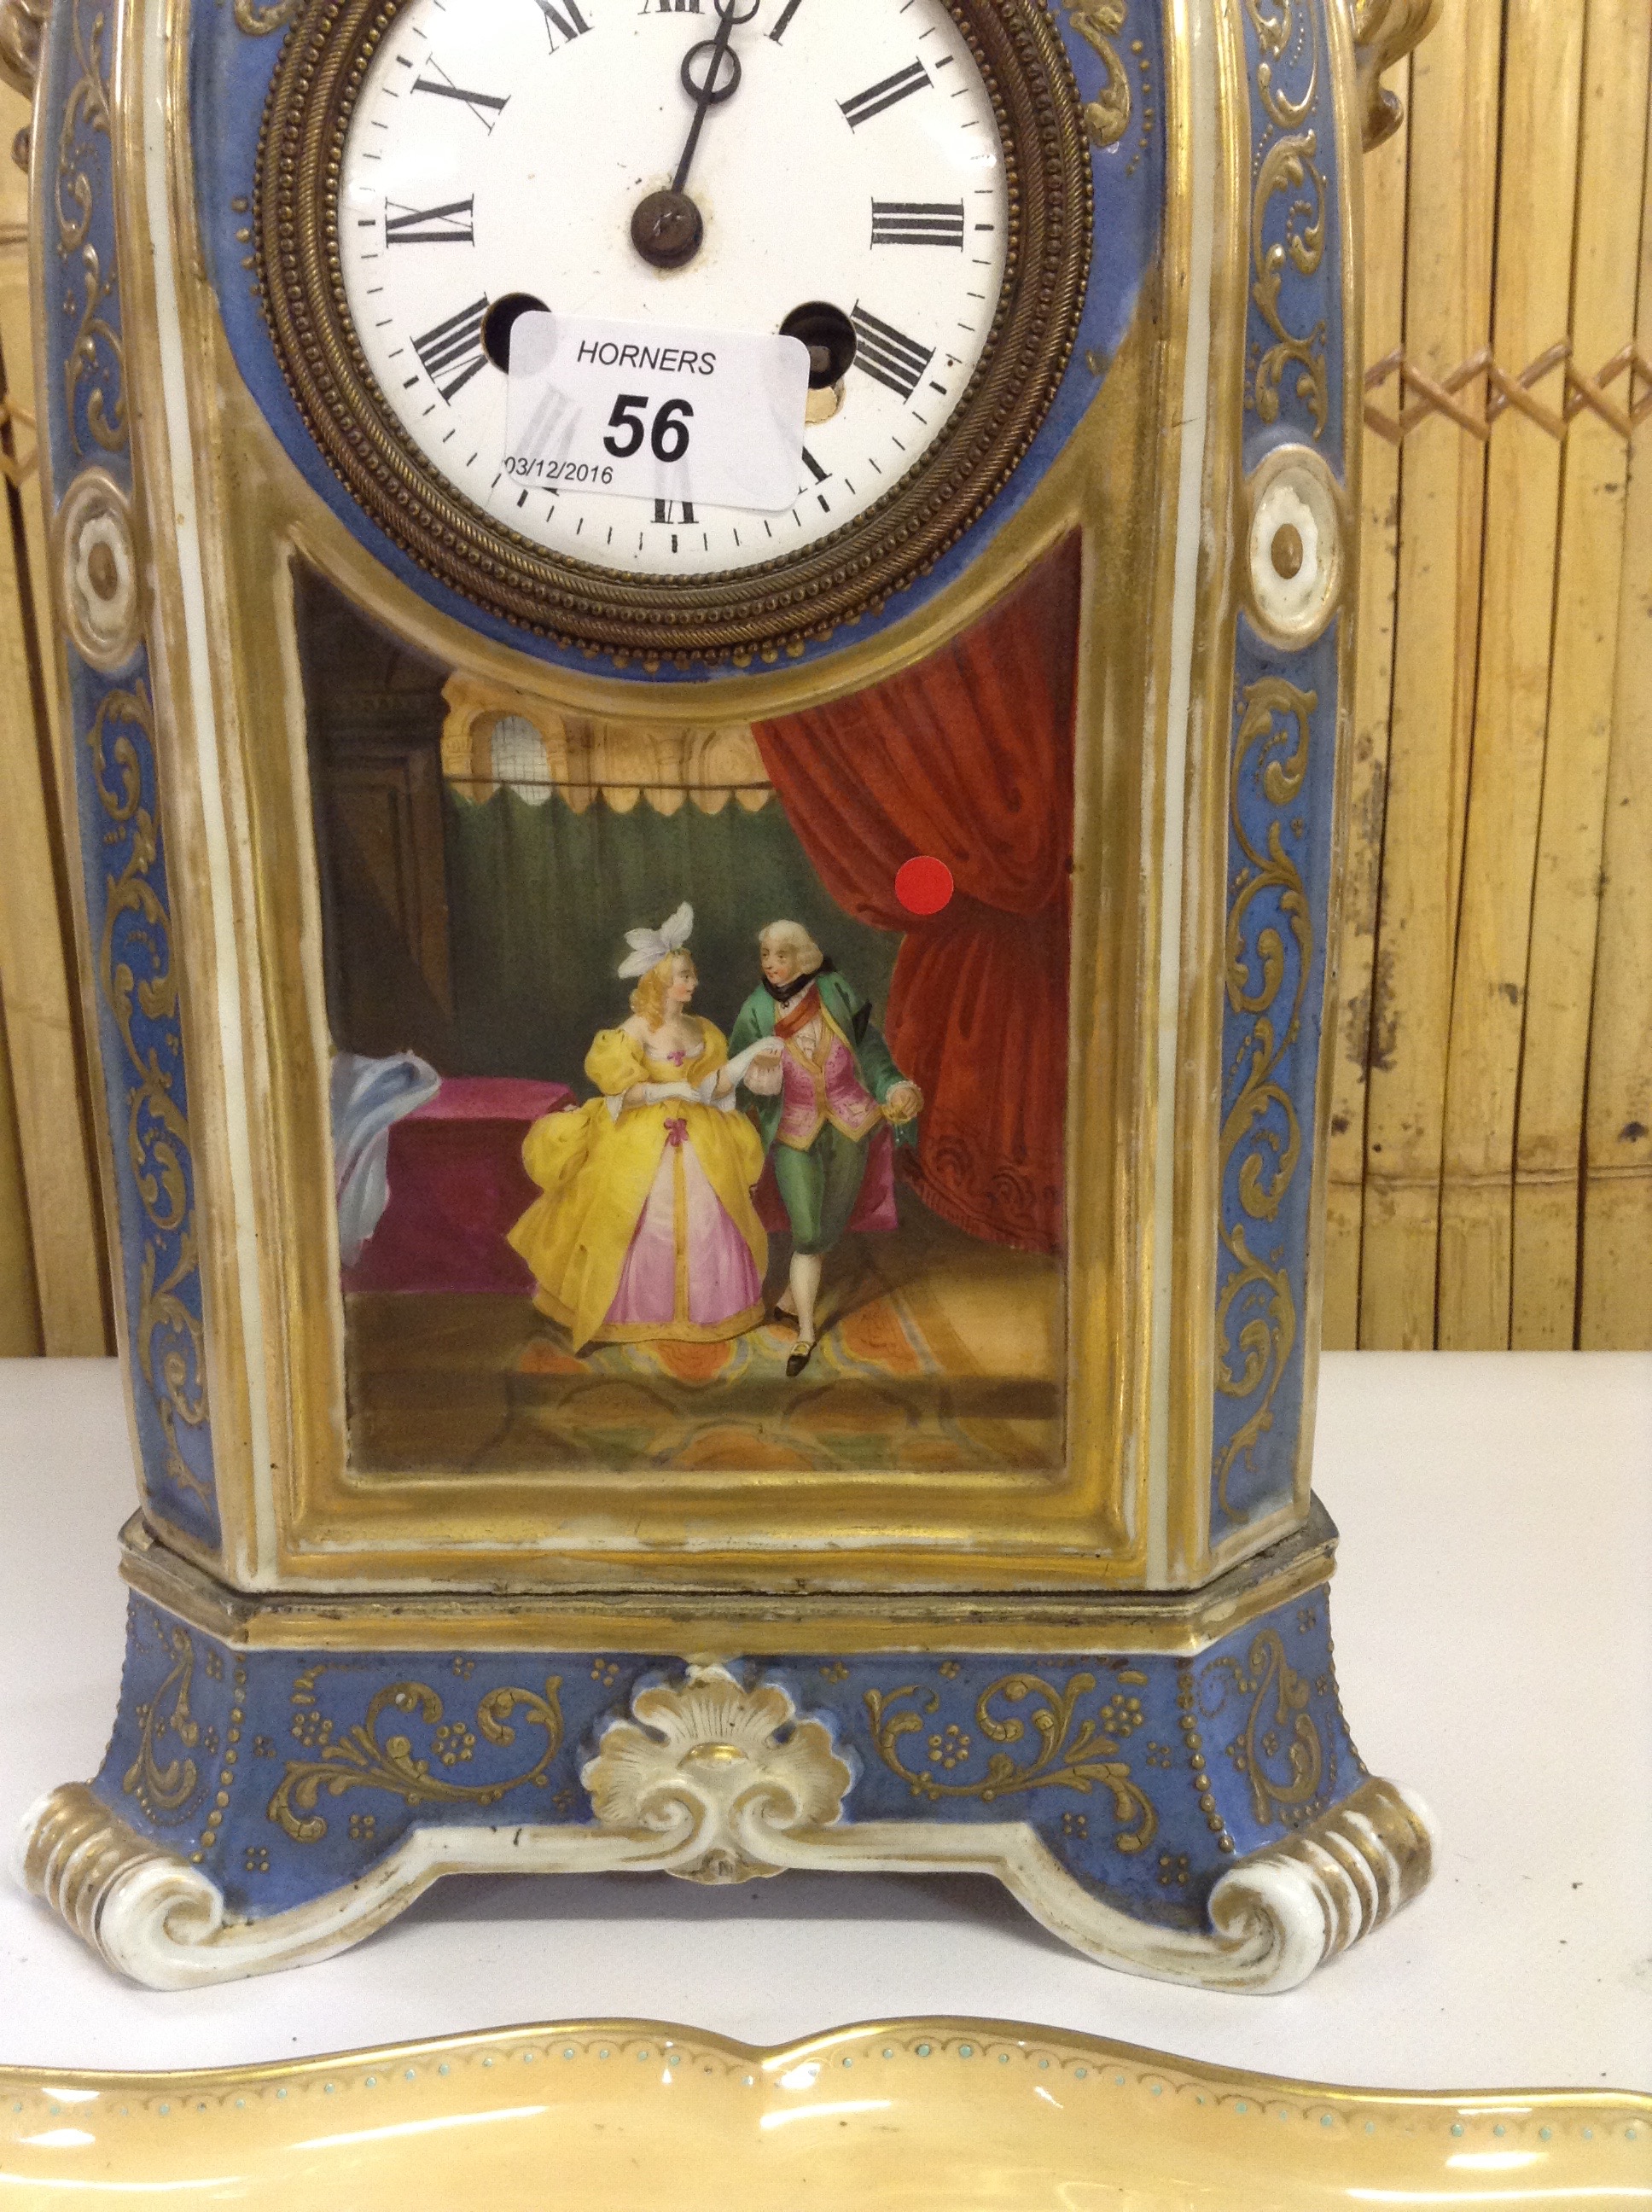 CONTINENTAL CHINA MANTLE CLOCK PAINTED WITH CLASSICAL SCENES ALONG WITH A DRESDEN PORCELAIN TRAY - Image 4 of 5